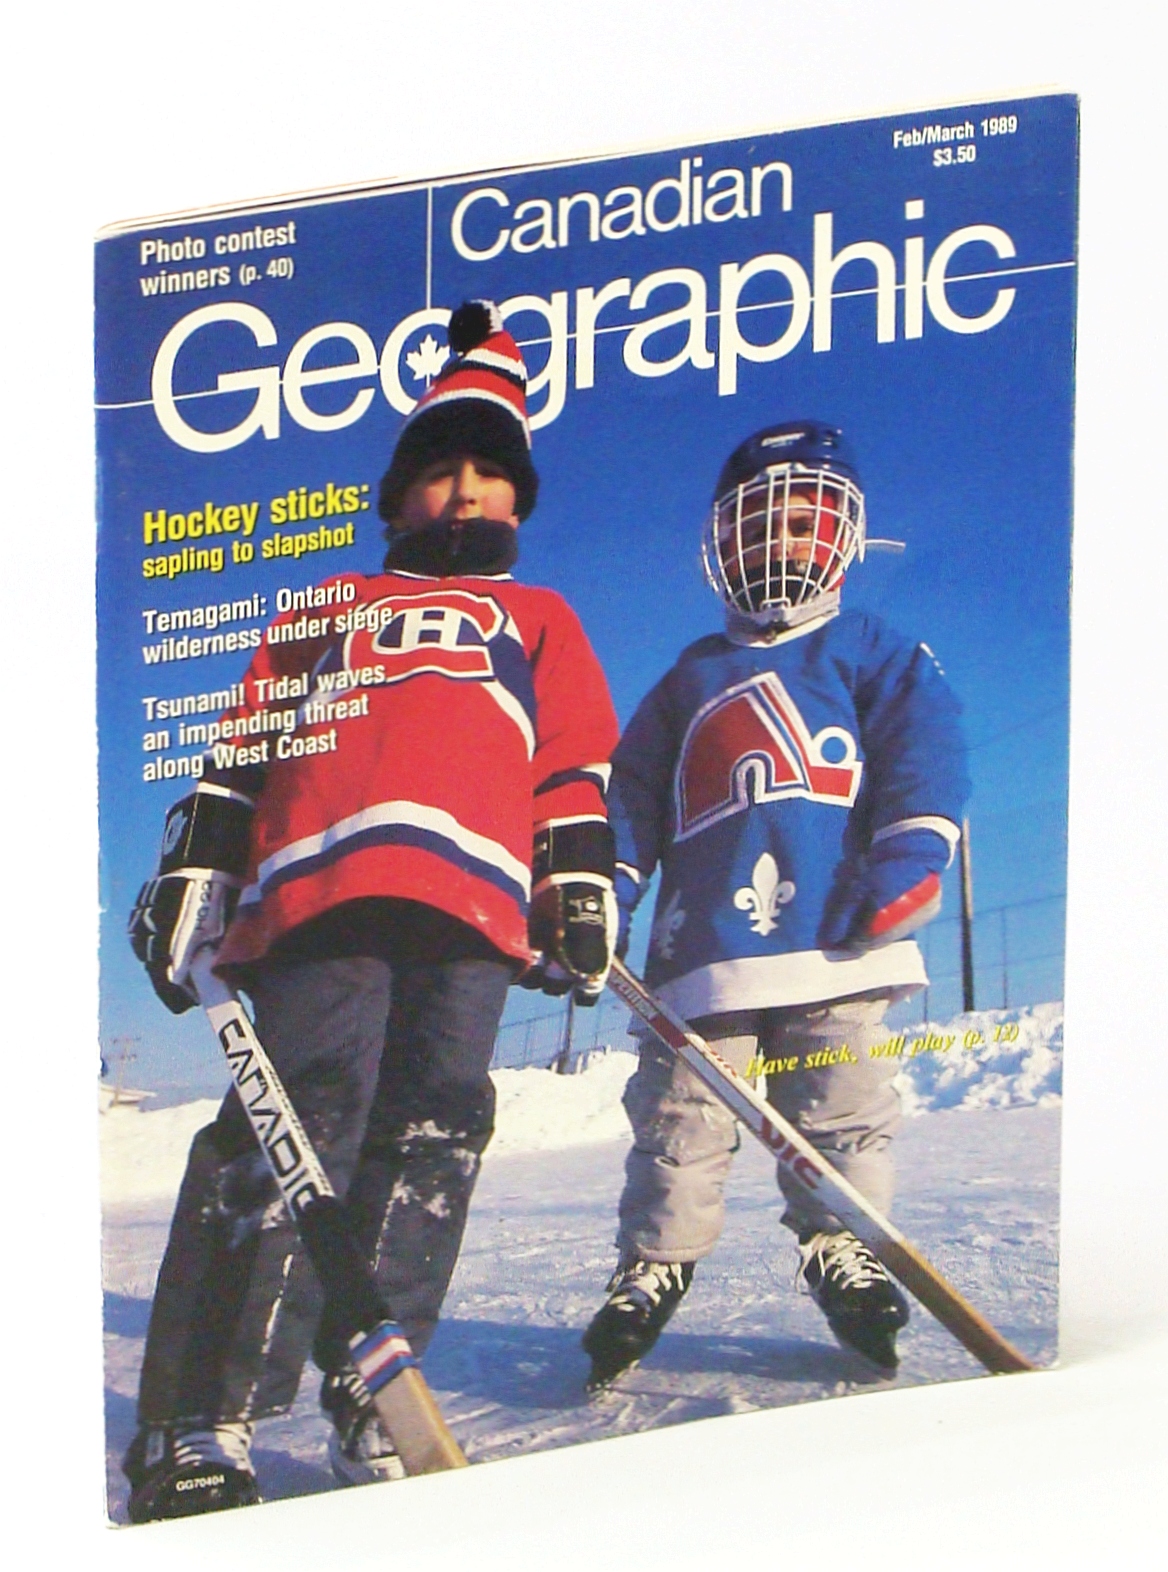 WILKINS, CHARLES; SANGSTER, DOROTHY; MOISE, BEN; OBEE, BRUCE; ROY-SOLE, MONIQUE; BLOHM, HANS; MICHIEL, PATRICK; TYMSTRA, Y. ROBERT - Canadian Geographic Magazine, February / March [Feb. / Mar. ] 1989: Hockey Sticks - Sapling to Slapshot